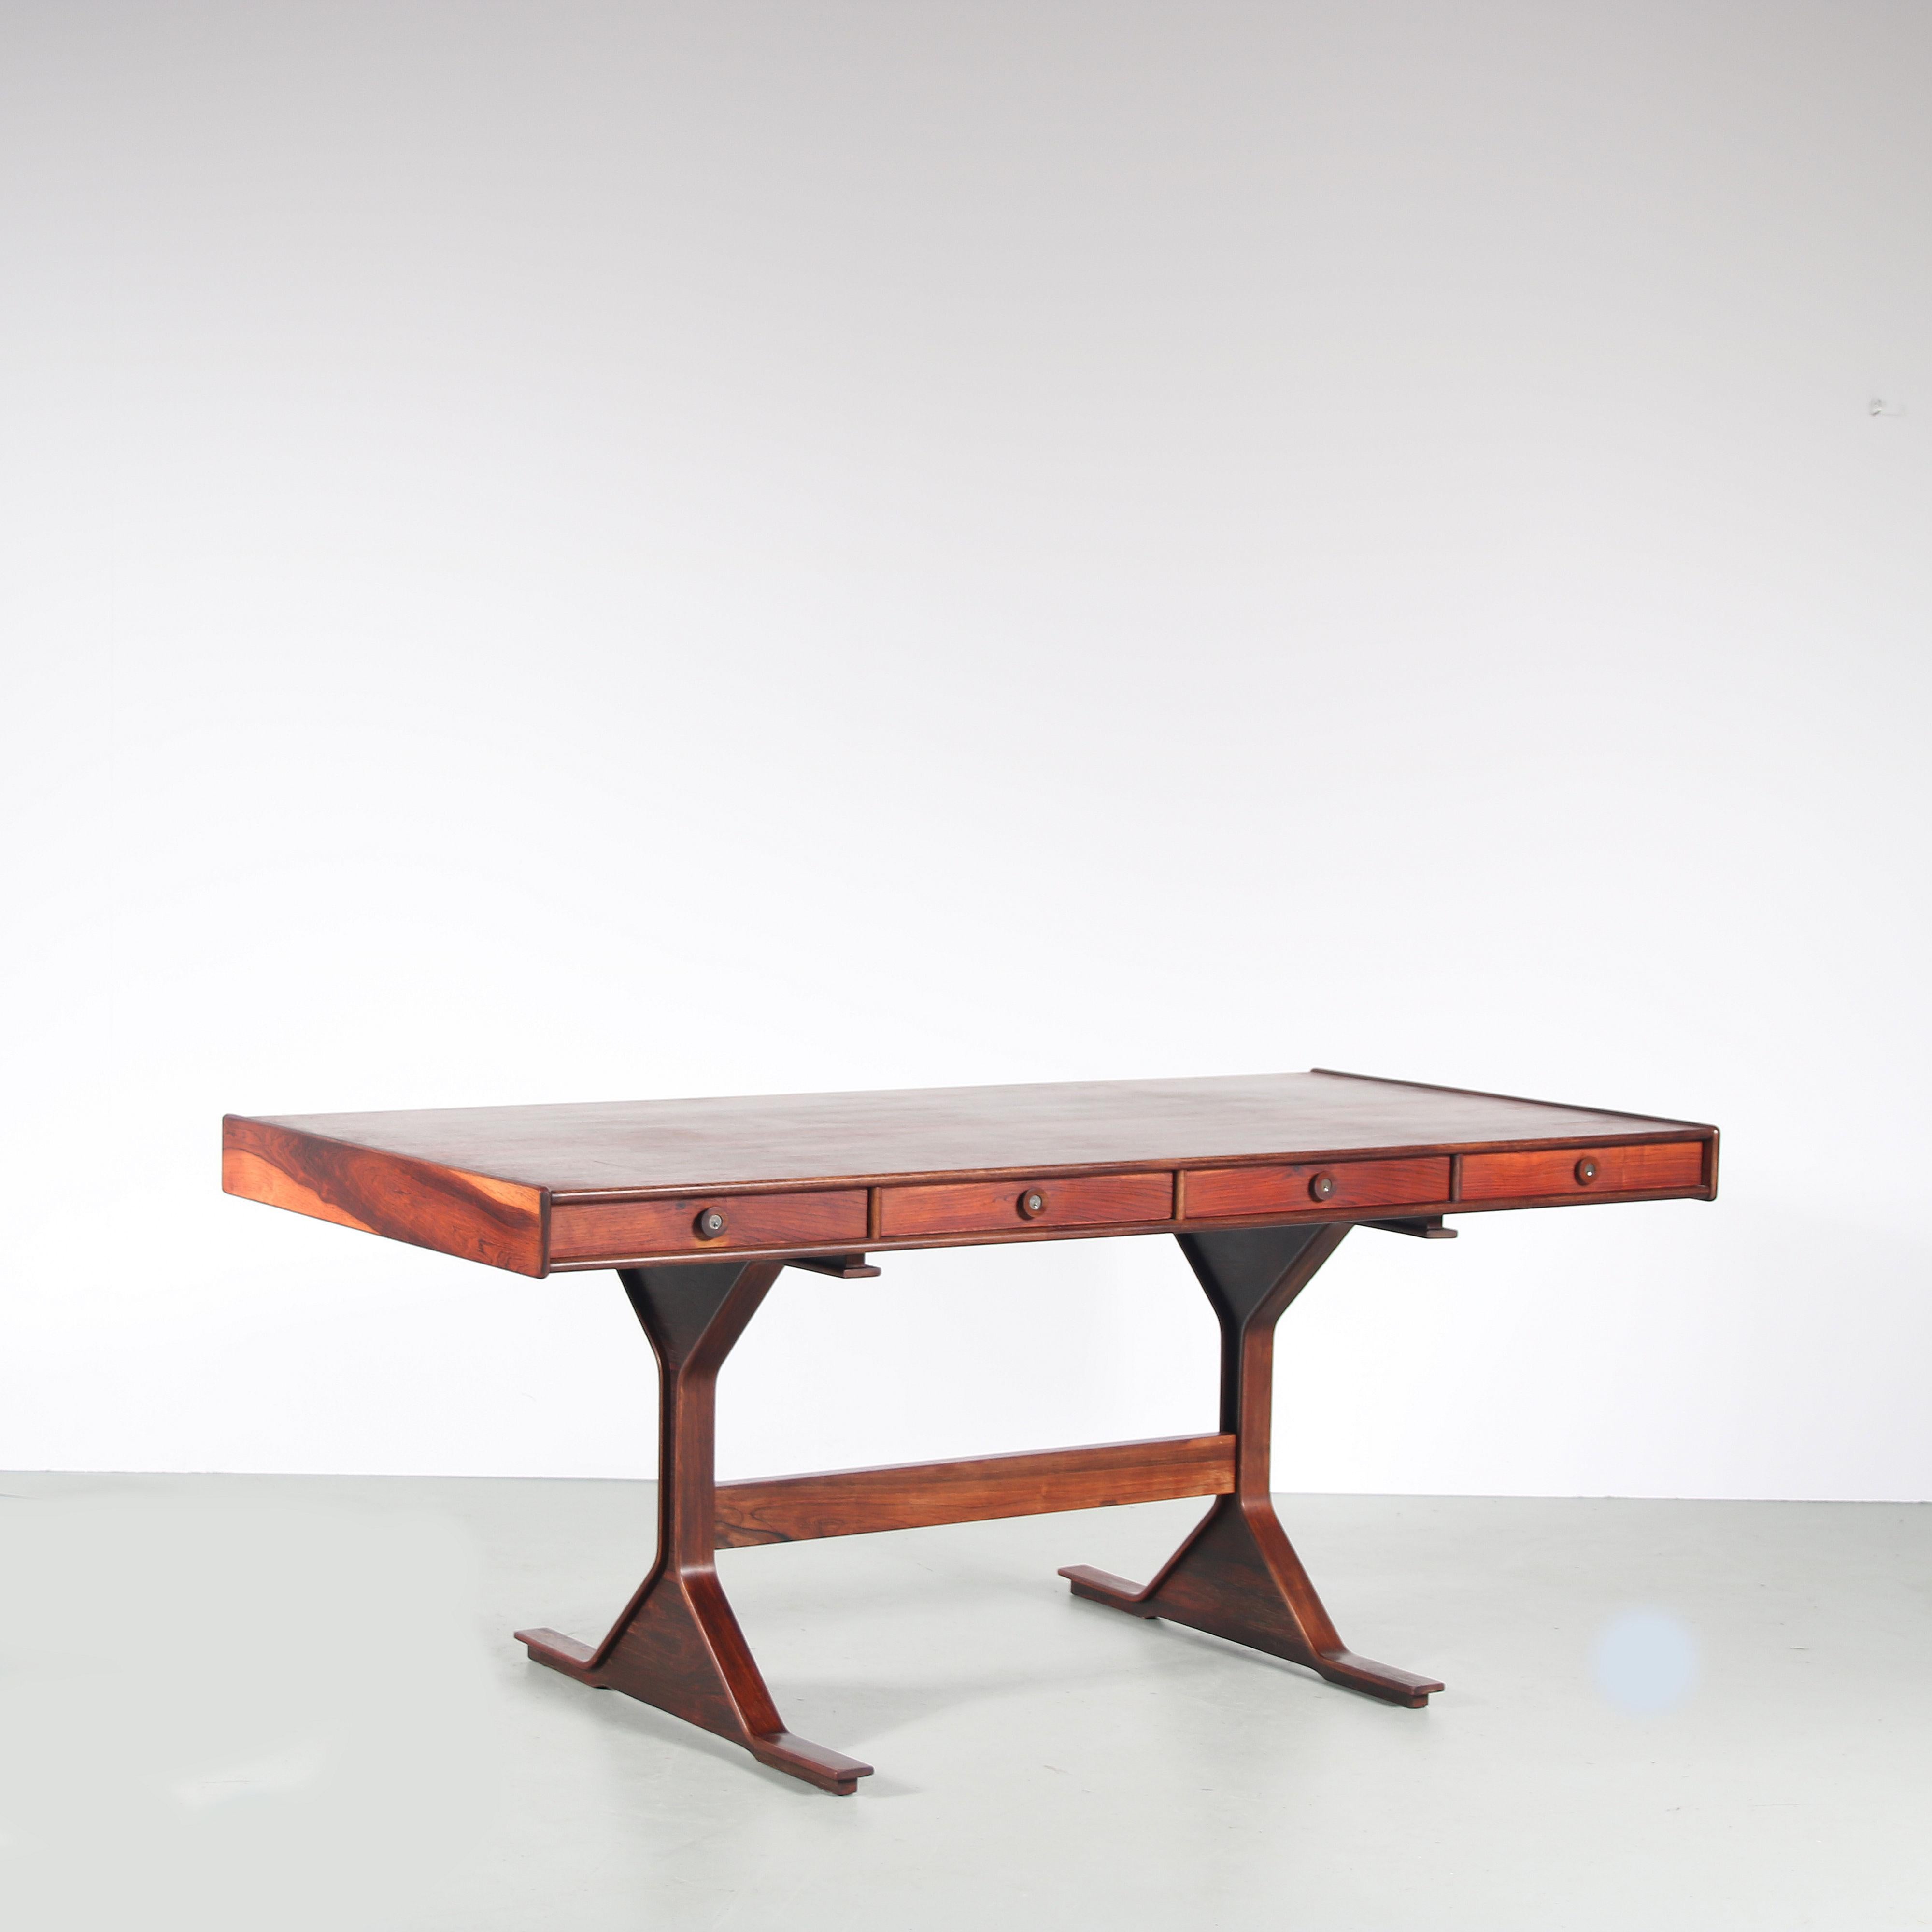 

A beautiful large desk designed by Gianfranco Frattini, manufactured by Bernini in Italy around 1950.

This high quality, well executed piece is made of high quality rosewood in a wonderful warm brown colour. The piece has a smooth finish with an